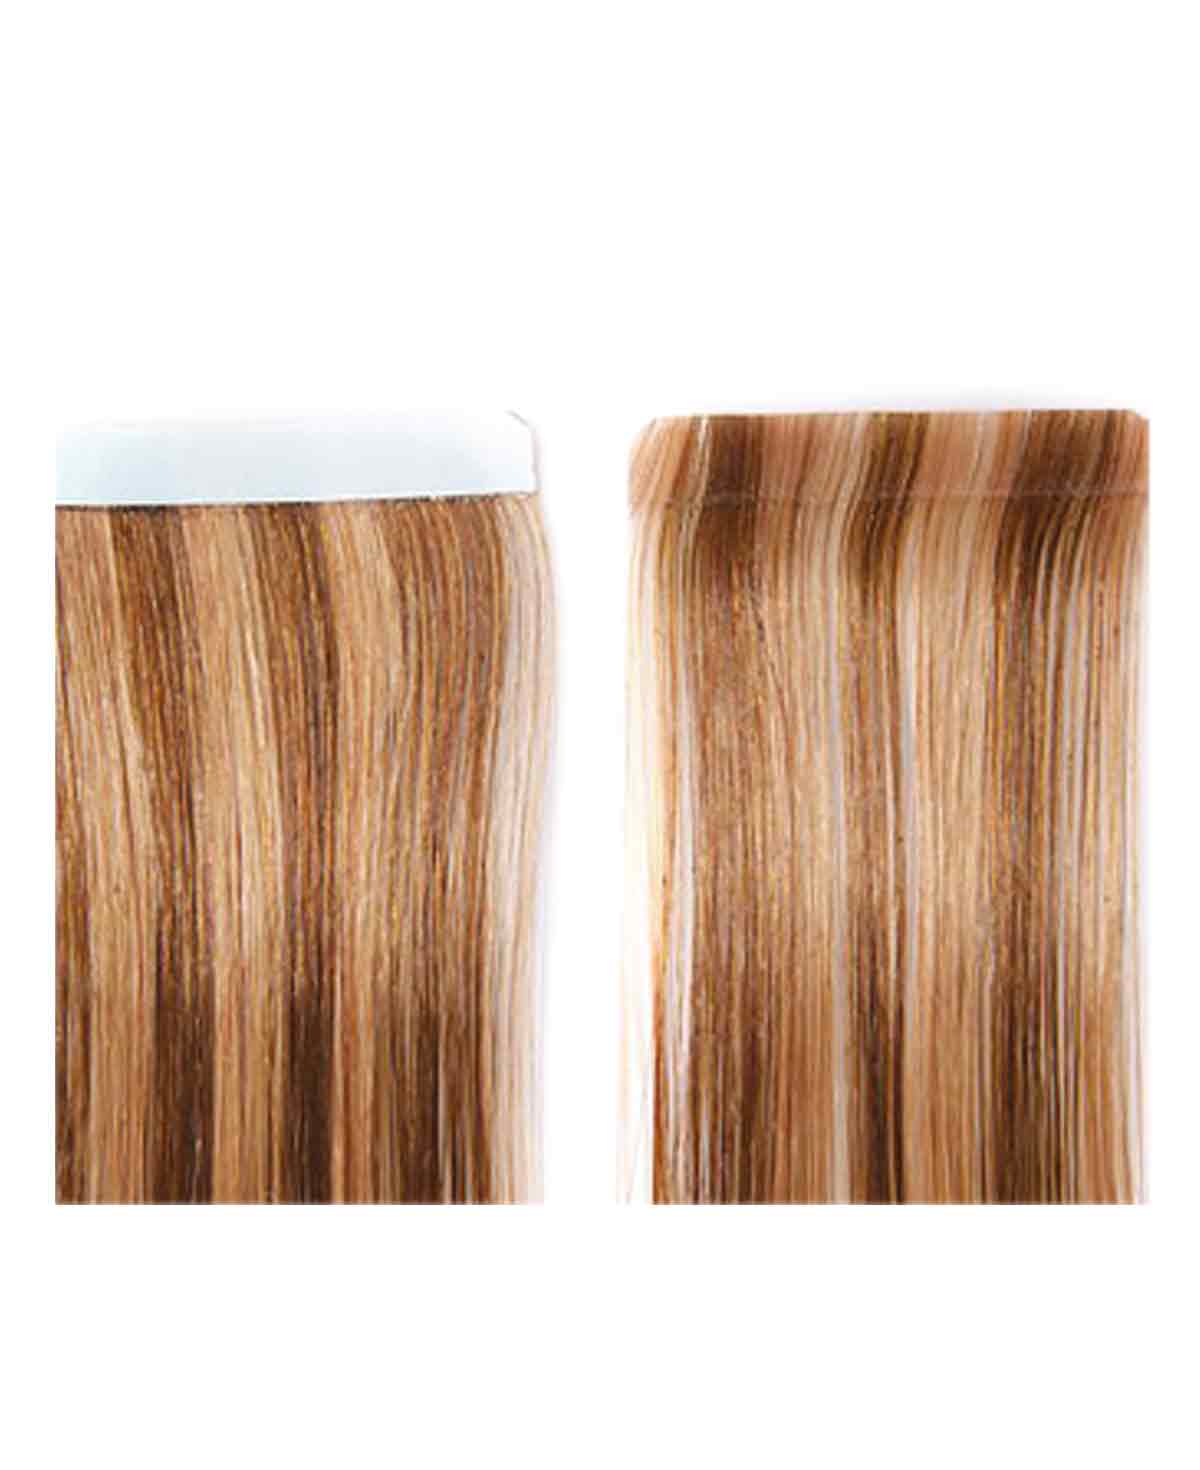 30-35cm (14") TAPE HAIR EXTENSIONS - SILVER BLONDE - 11NG